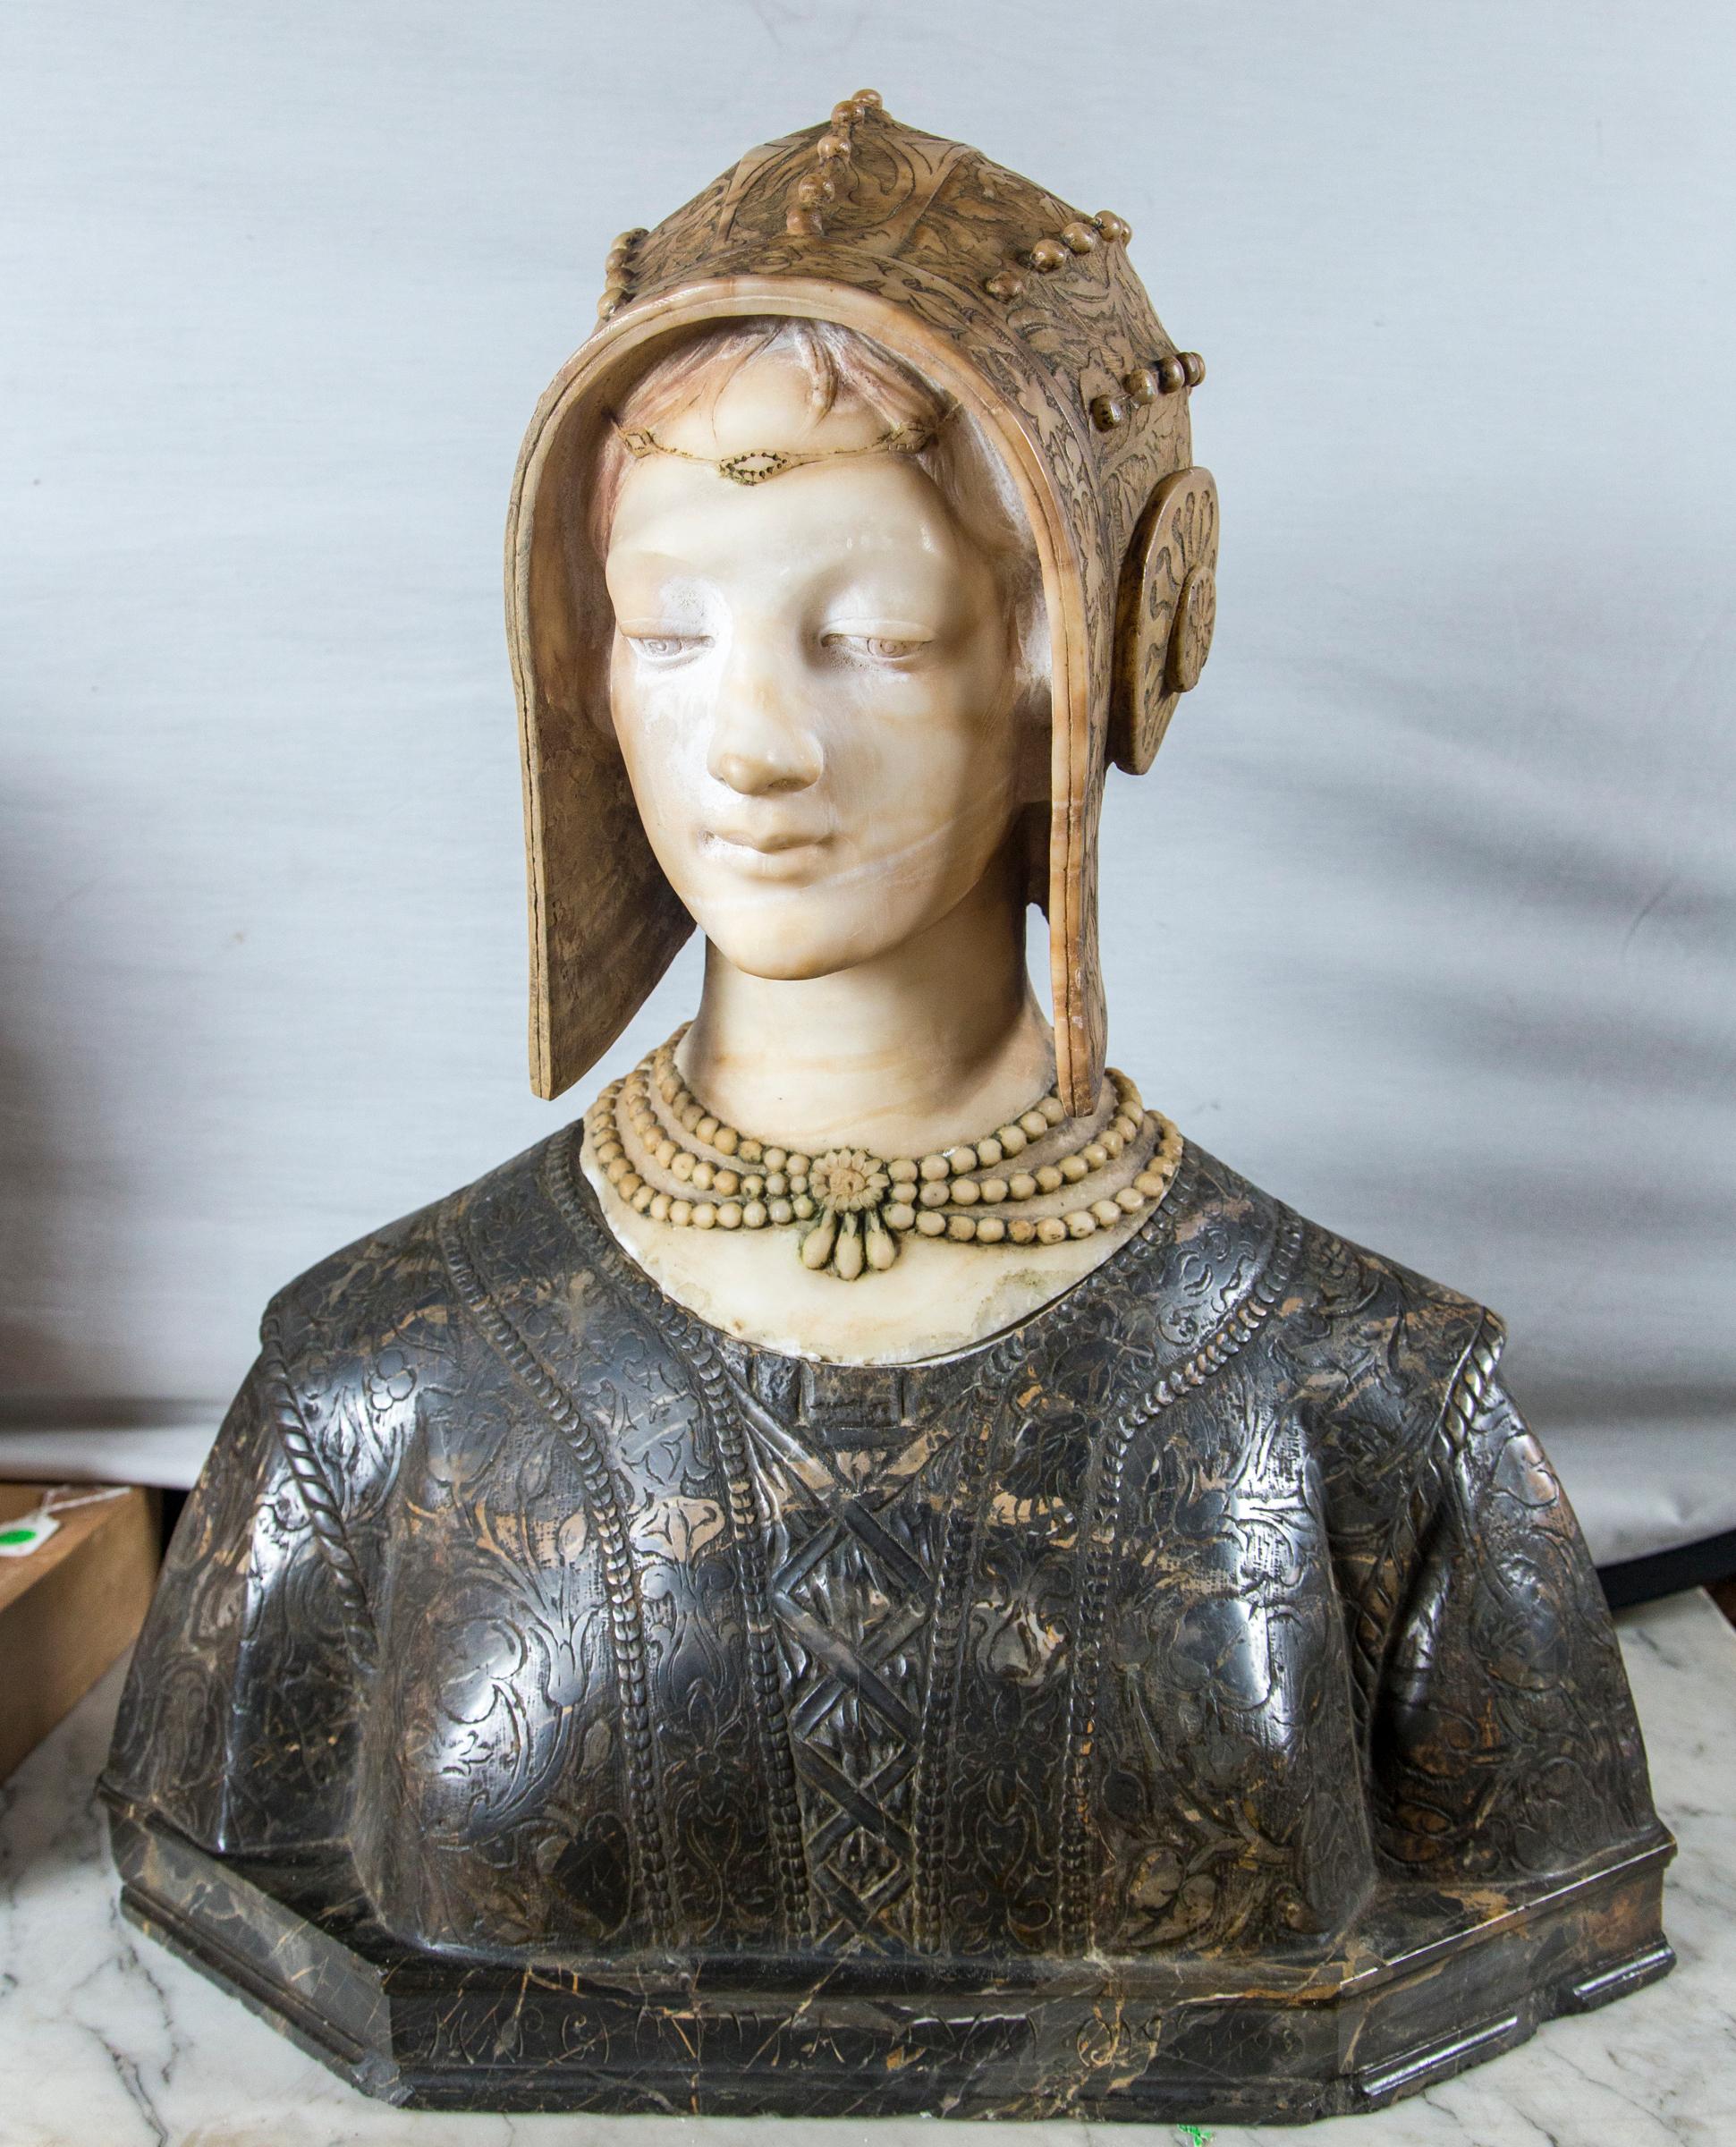 Her head carved separately and attached to the darker marble of her shoulders. There is a  metal  post   that hold  the  head to the  shoulders.  She wear a cloche hat, with incised decoration and appliques. Around her neck is a triple strand